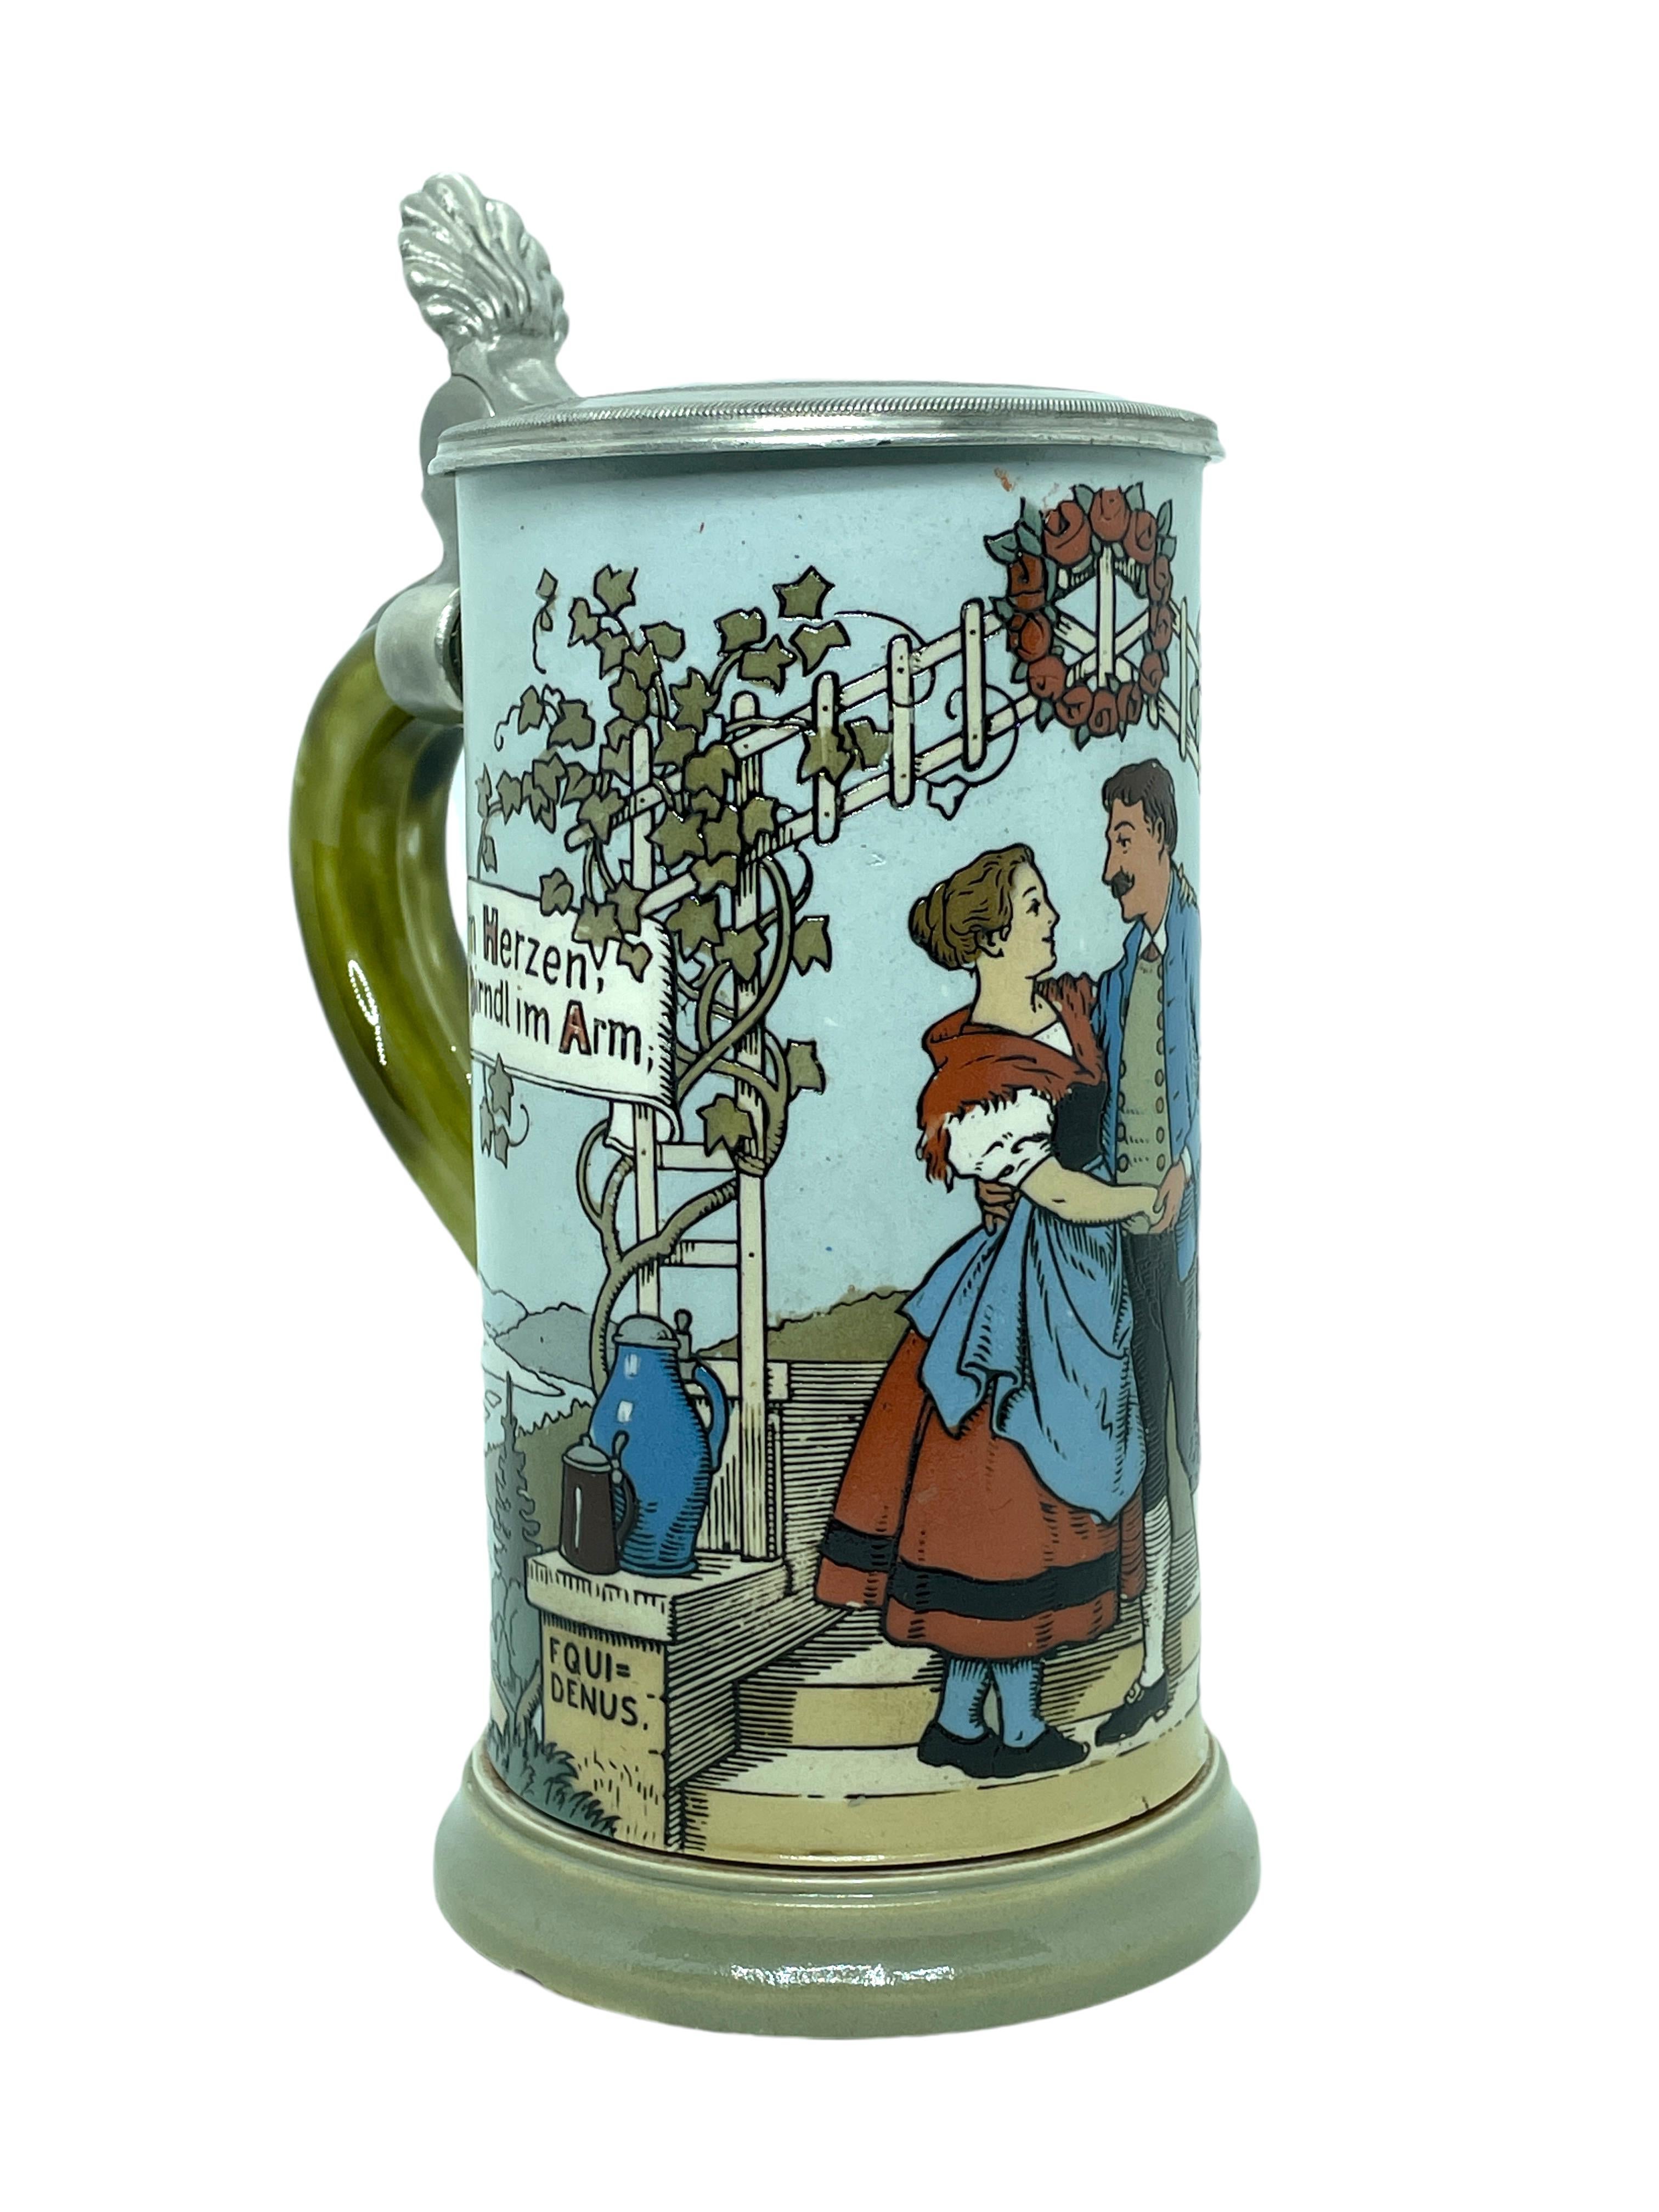 This beautiful beer stein has been made in Germany circa 1900s by the well known manufacturer Villeroy & Boch. Absolutely gorgeous piece and still in great condition. Lid works properly. A nice addition to any collection.
The Villeroy & Boch